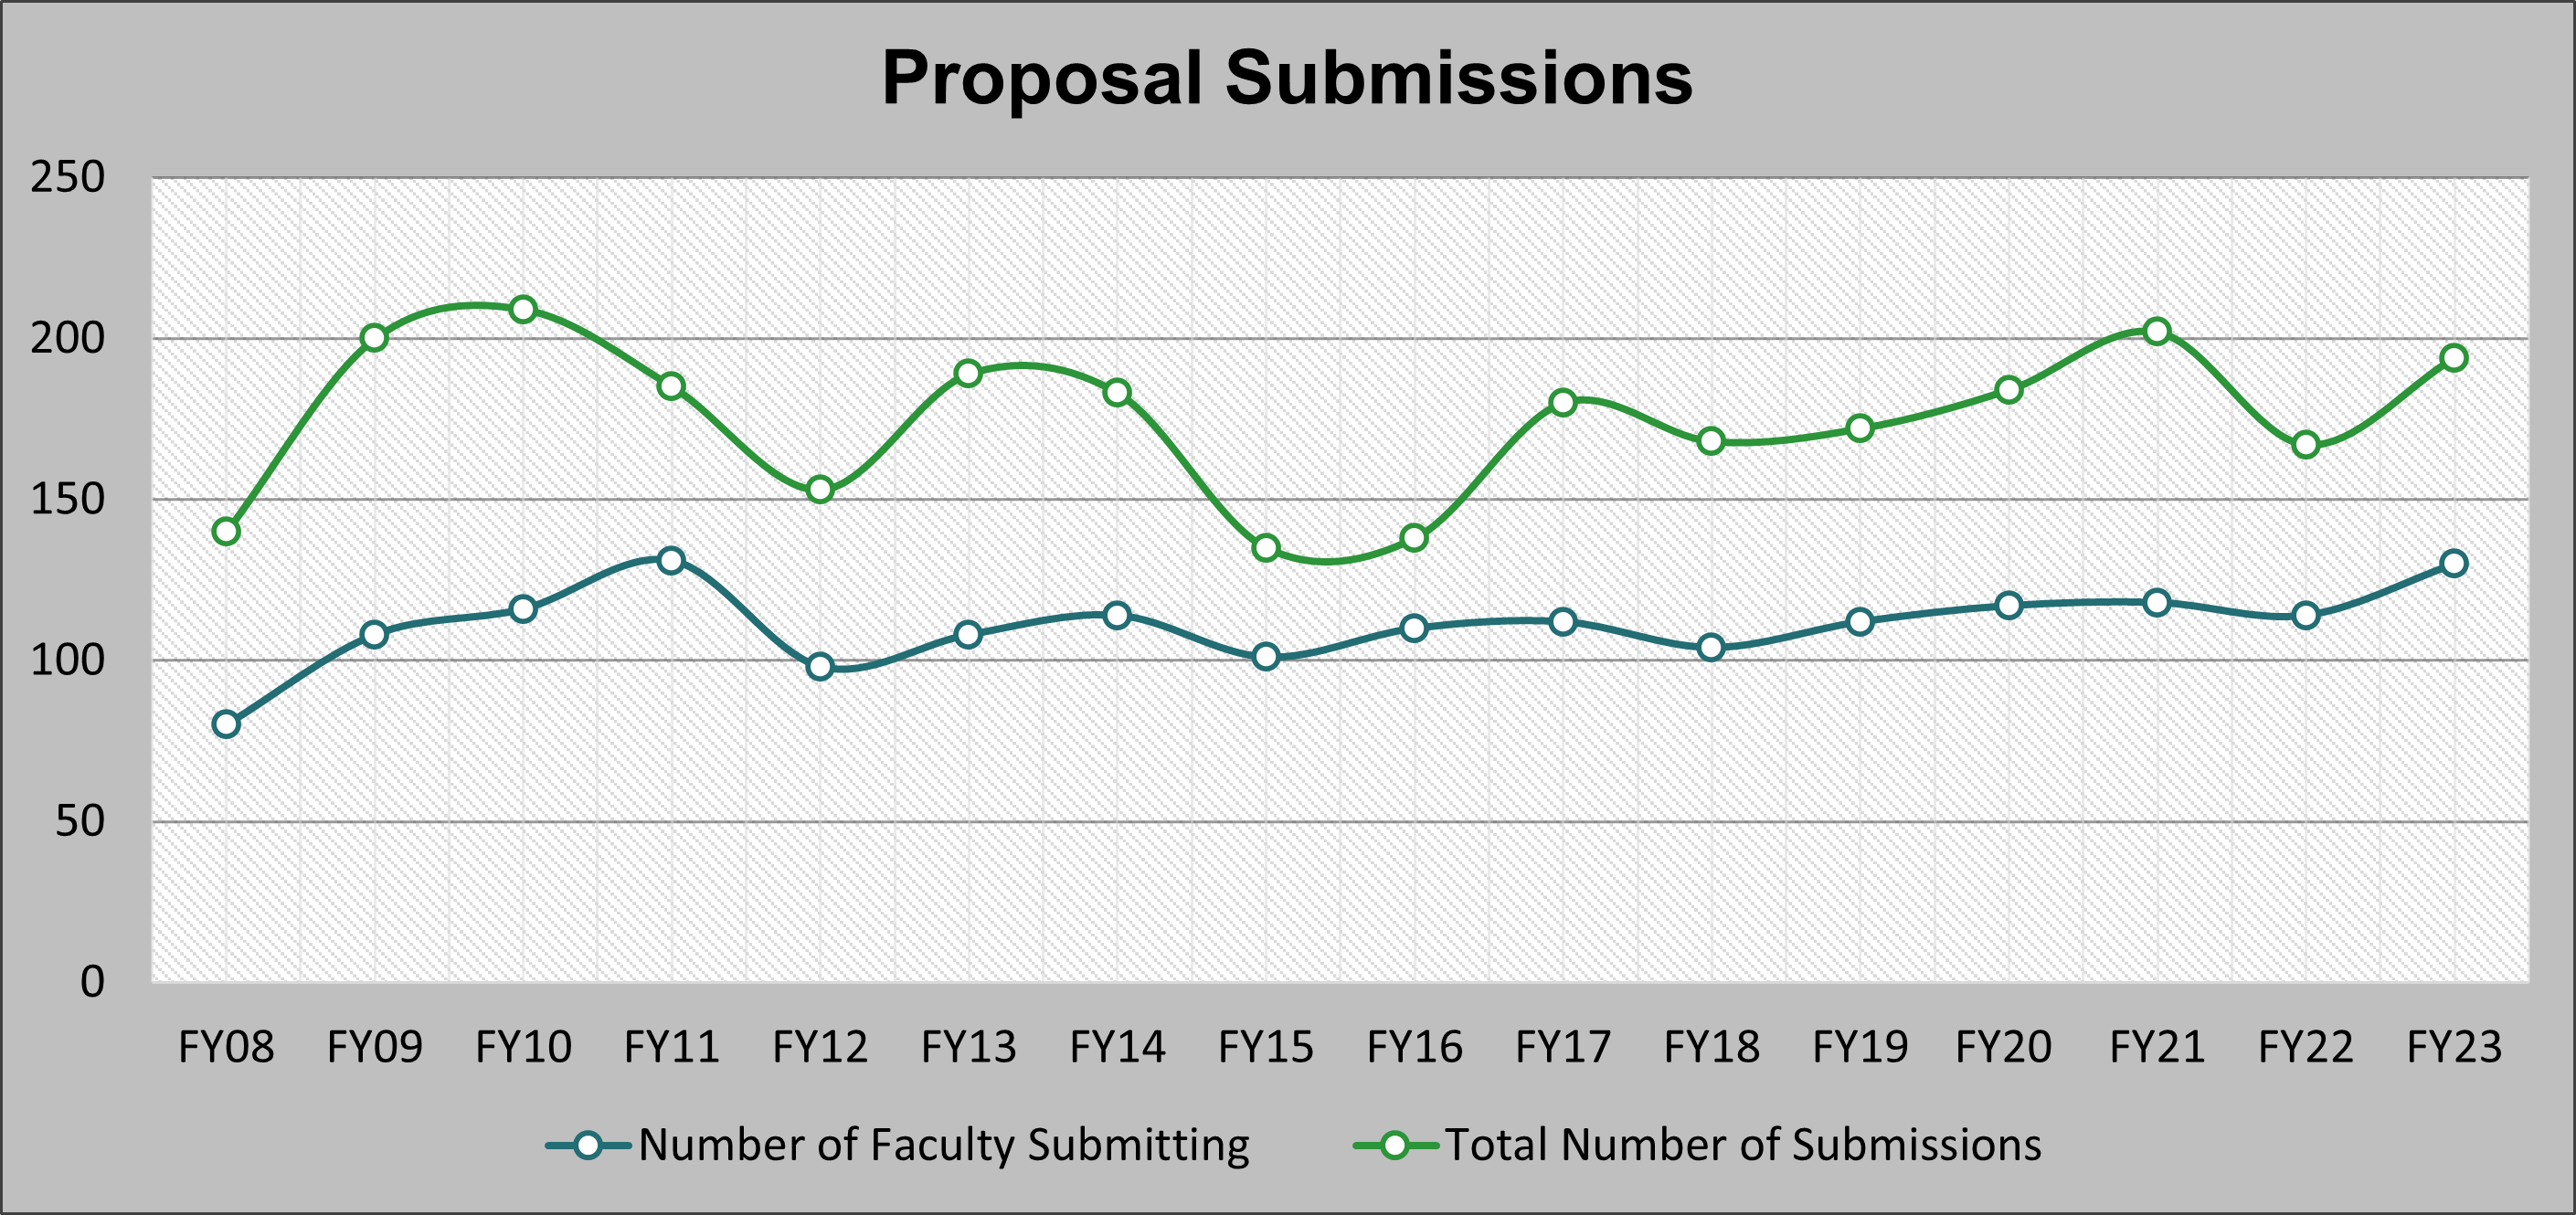 Chart of total proposal submissions from FY08 to FY23